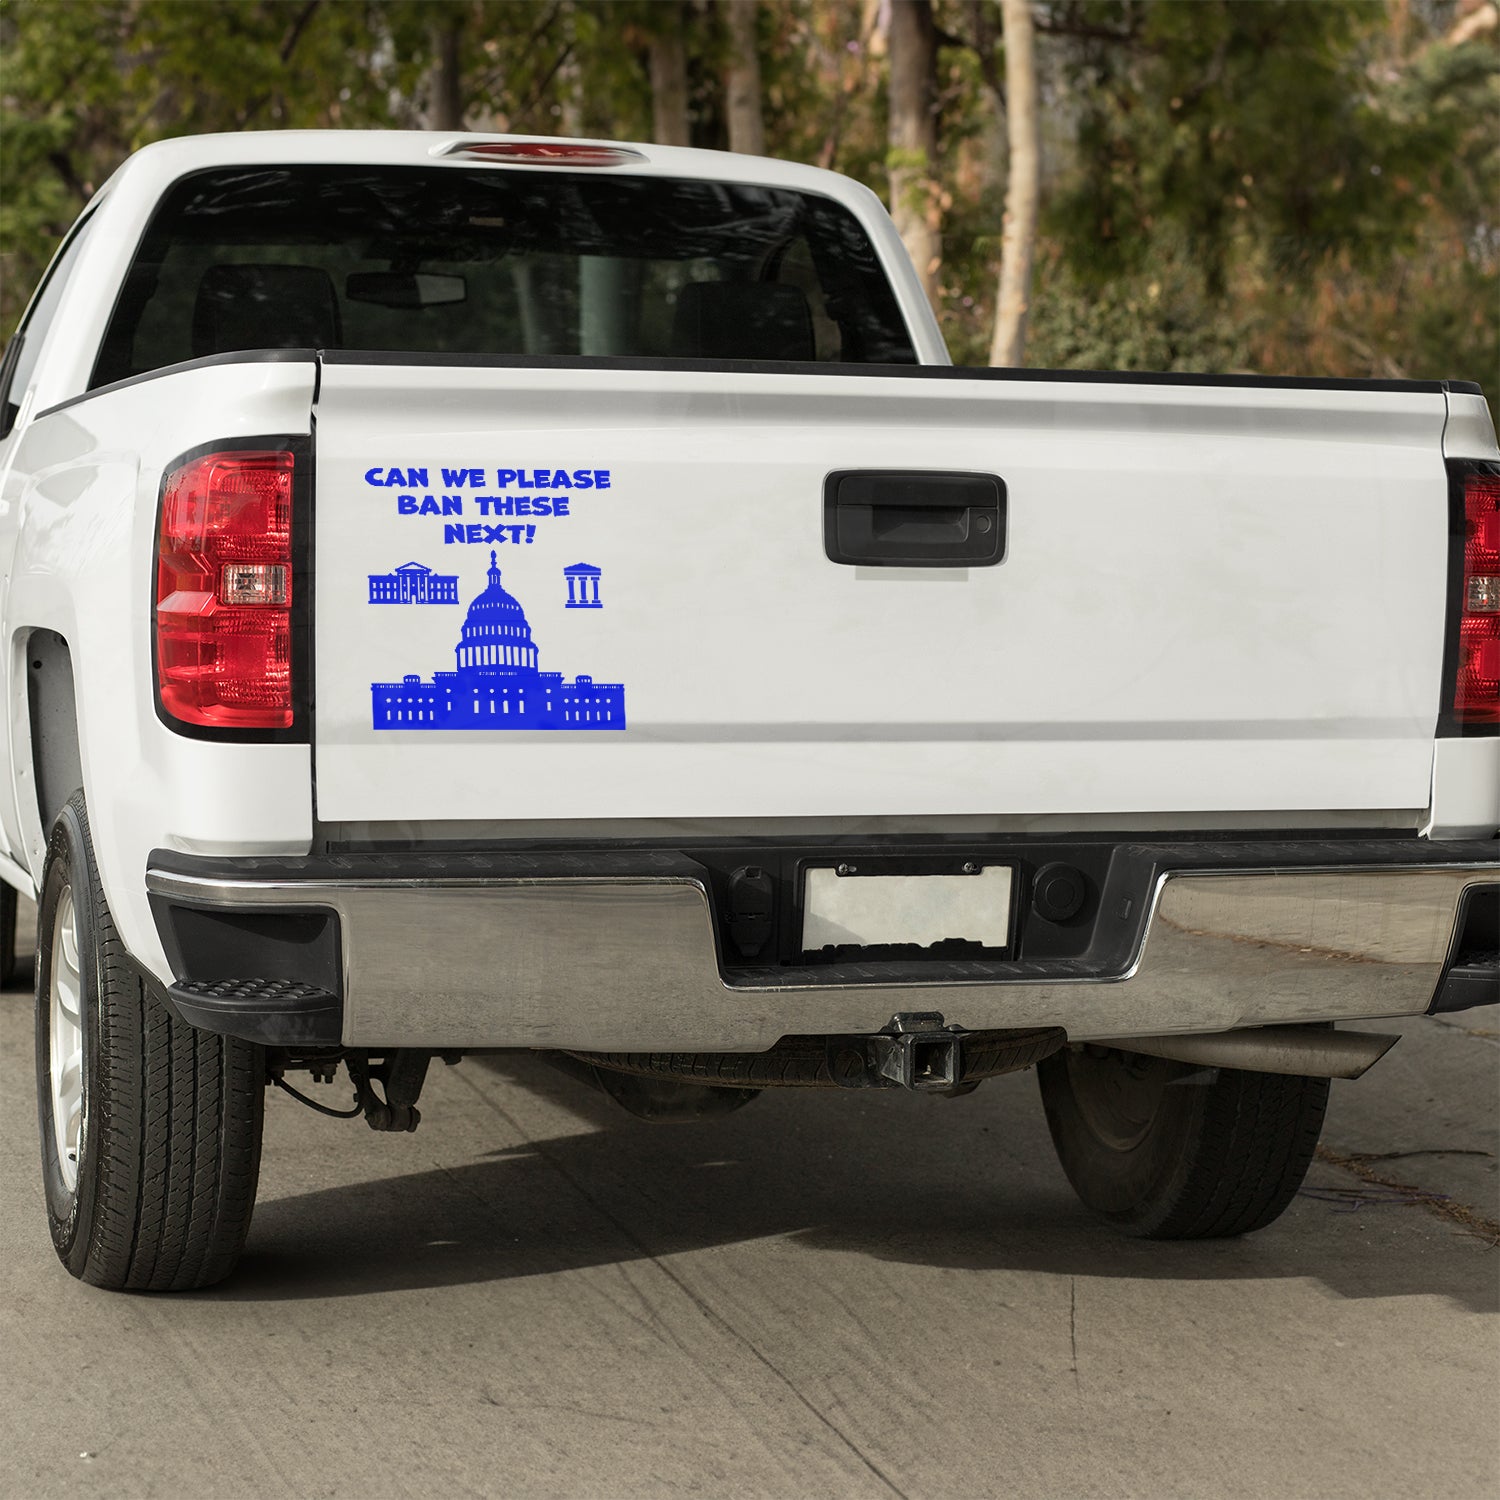 Can we please ban these next Vinyl decal decal stickers Decals for cars Decals for Trucks decals for tumblers minivan sticker SUV decals TikTok TikTok ban truck decals window decal car Window decals window decor